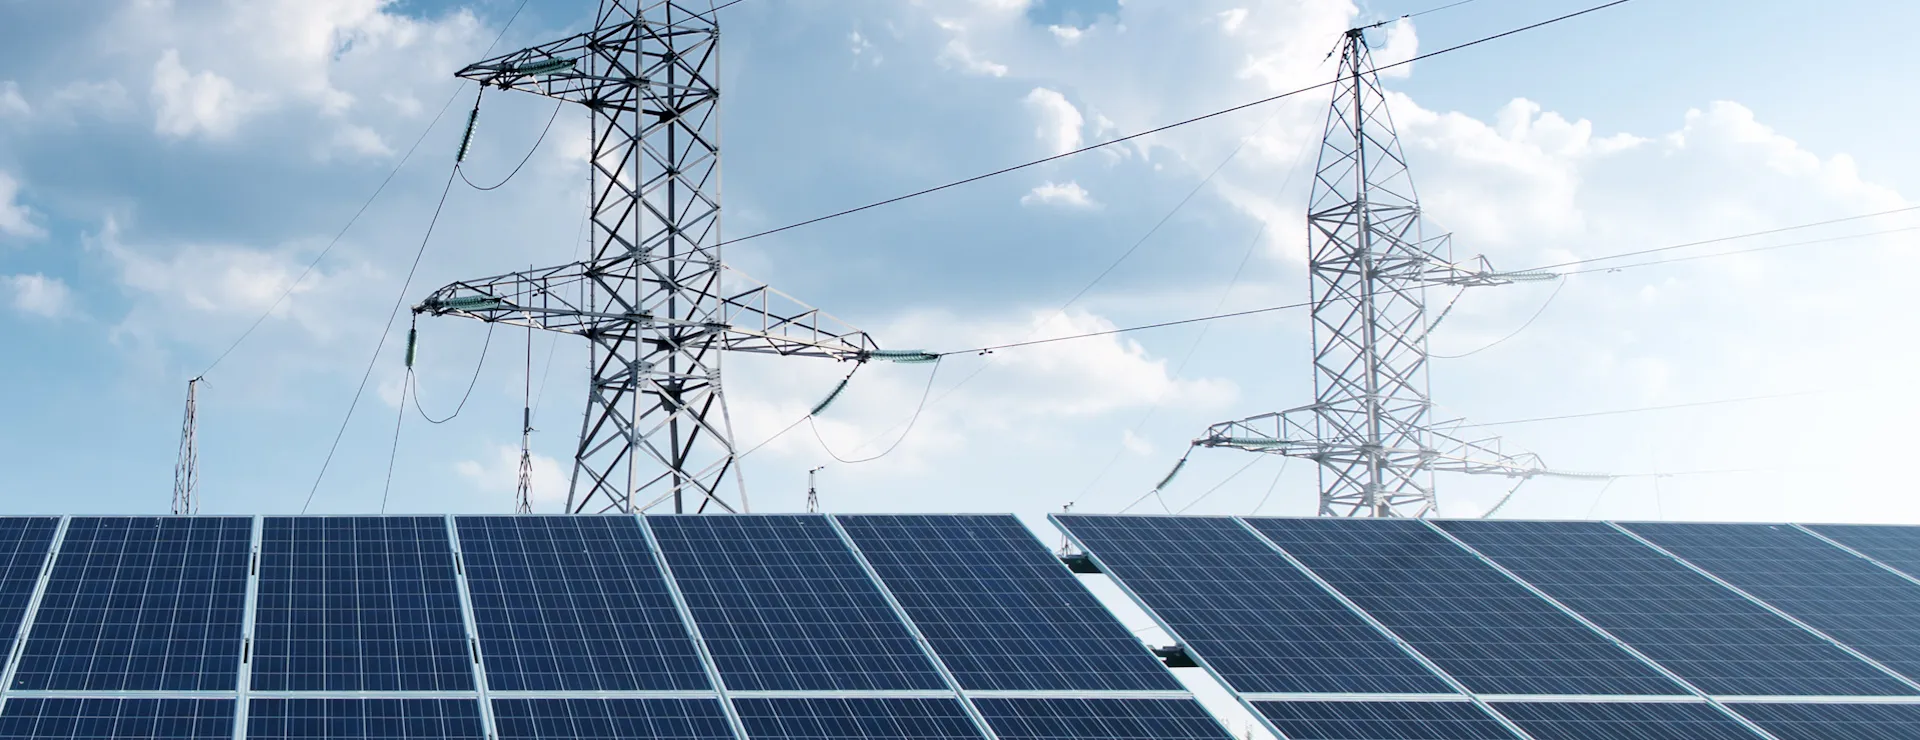 Solar data for utility grid planning and operations